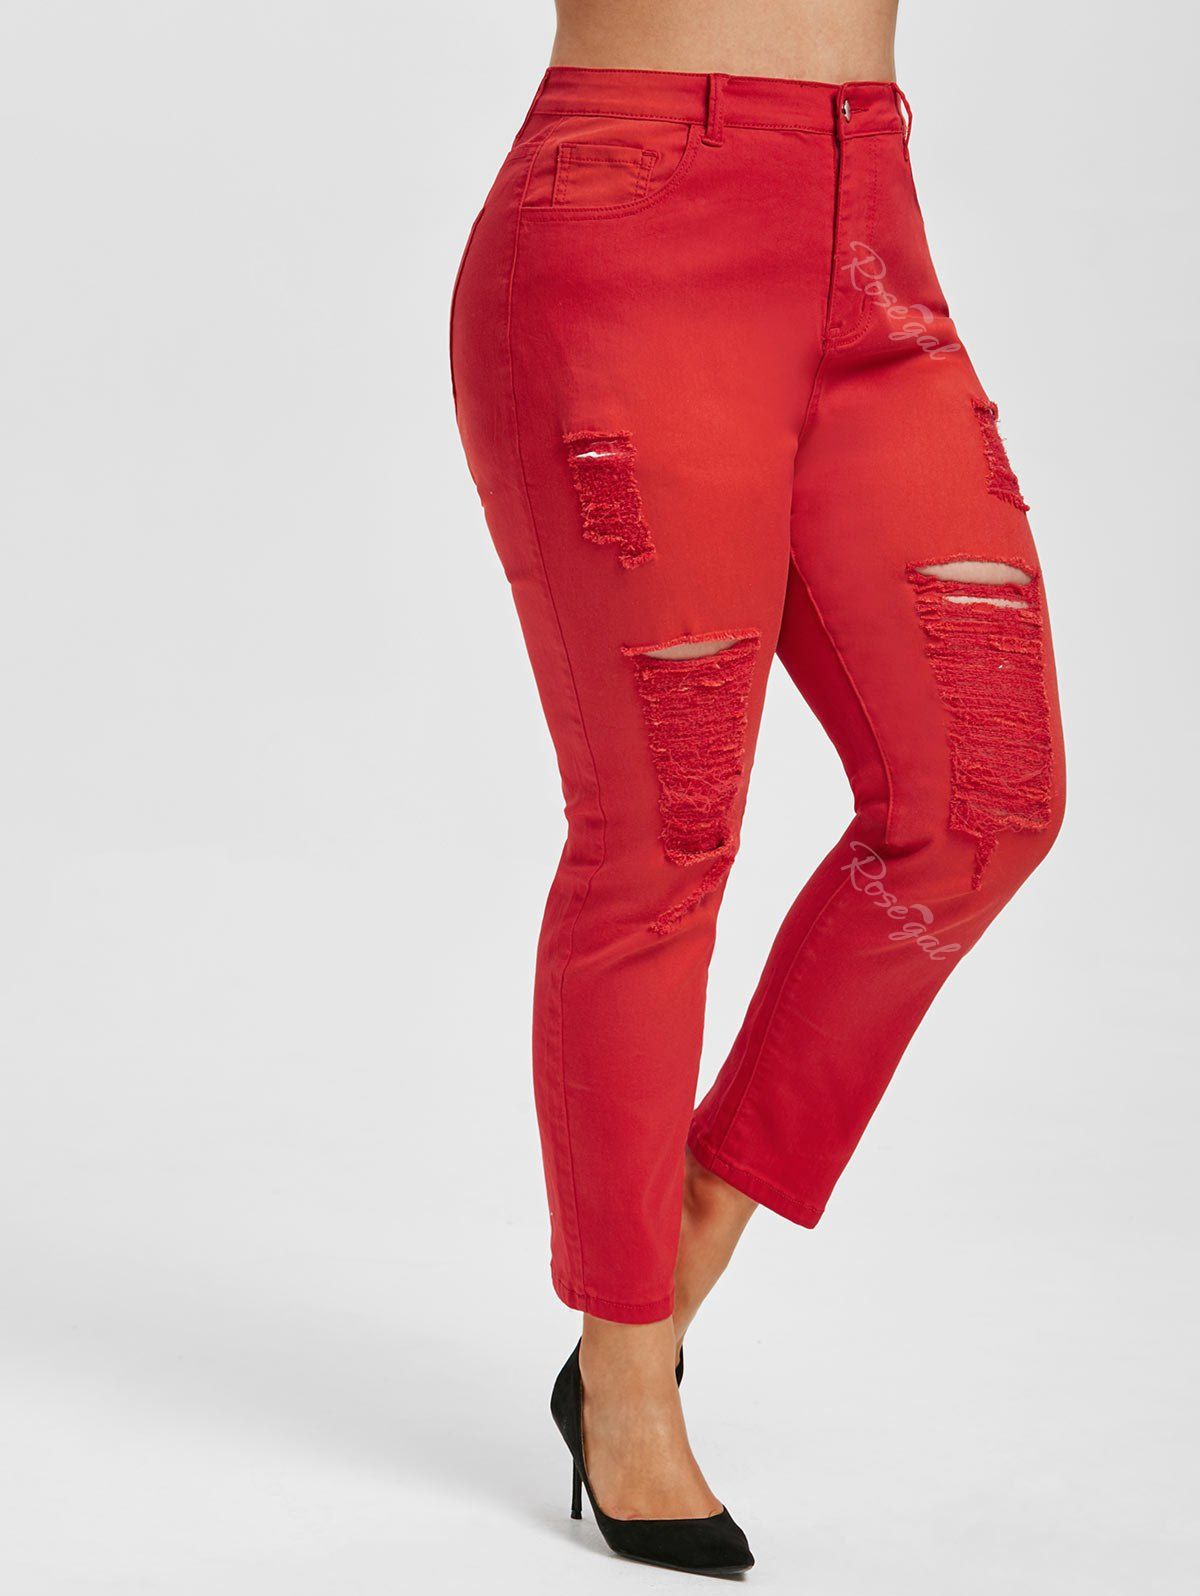 Buy Plus Size Colored Skinny Distressed Jeans  